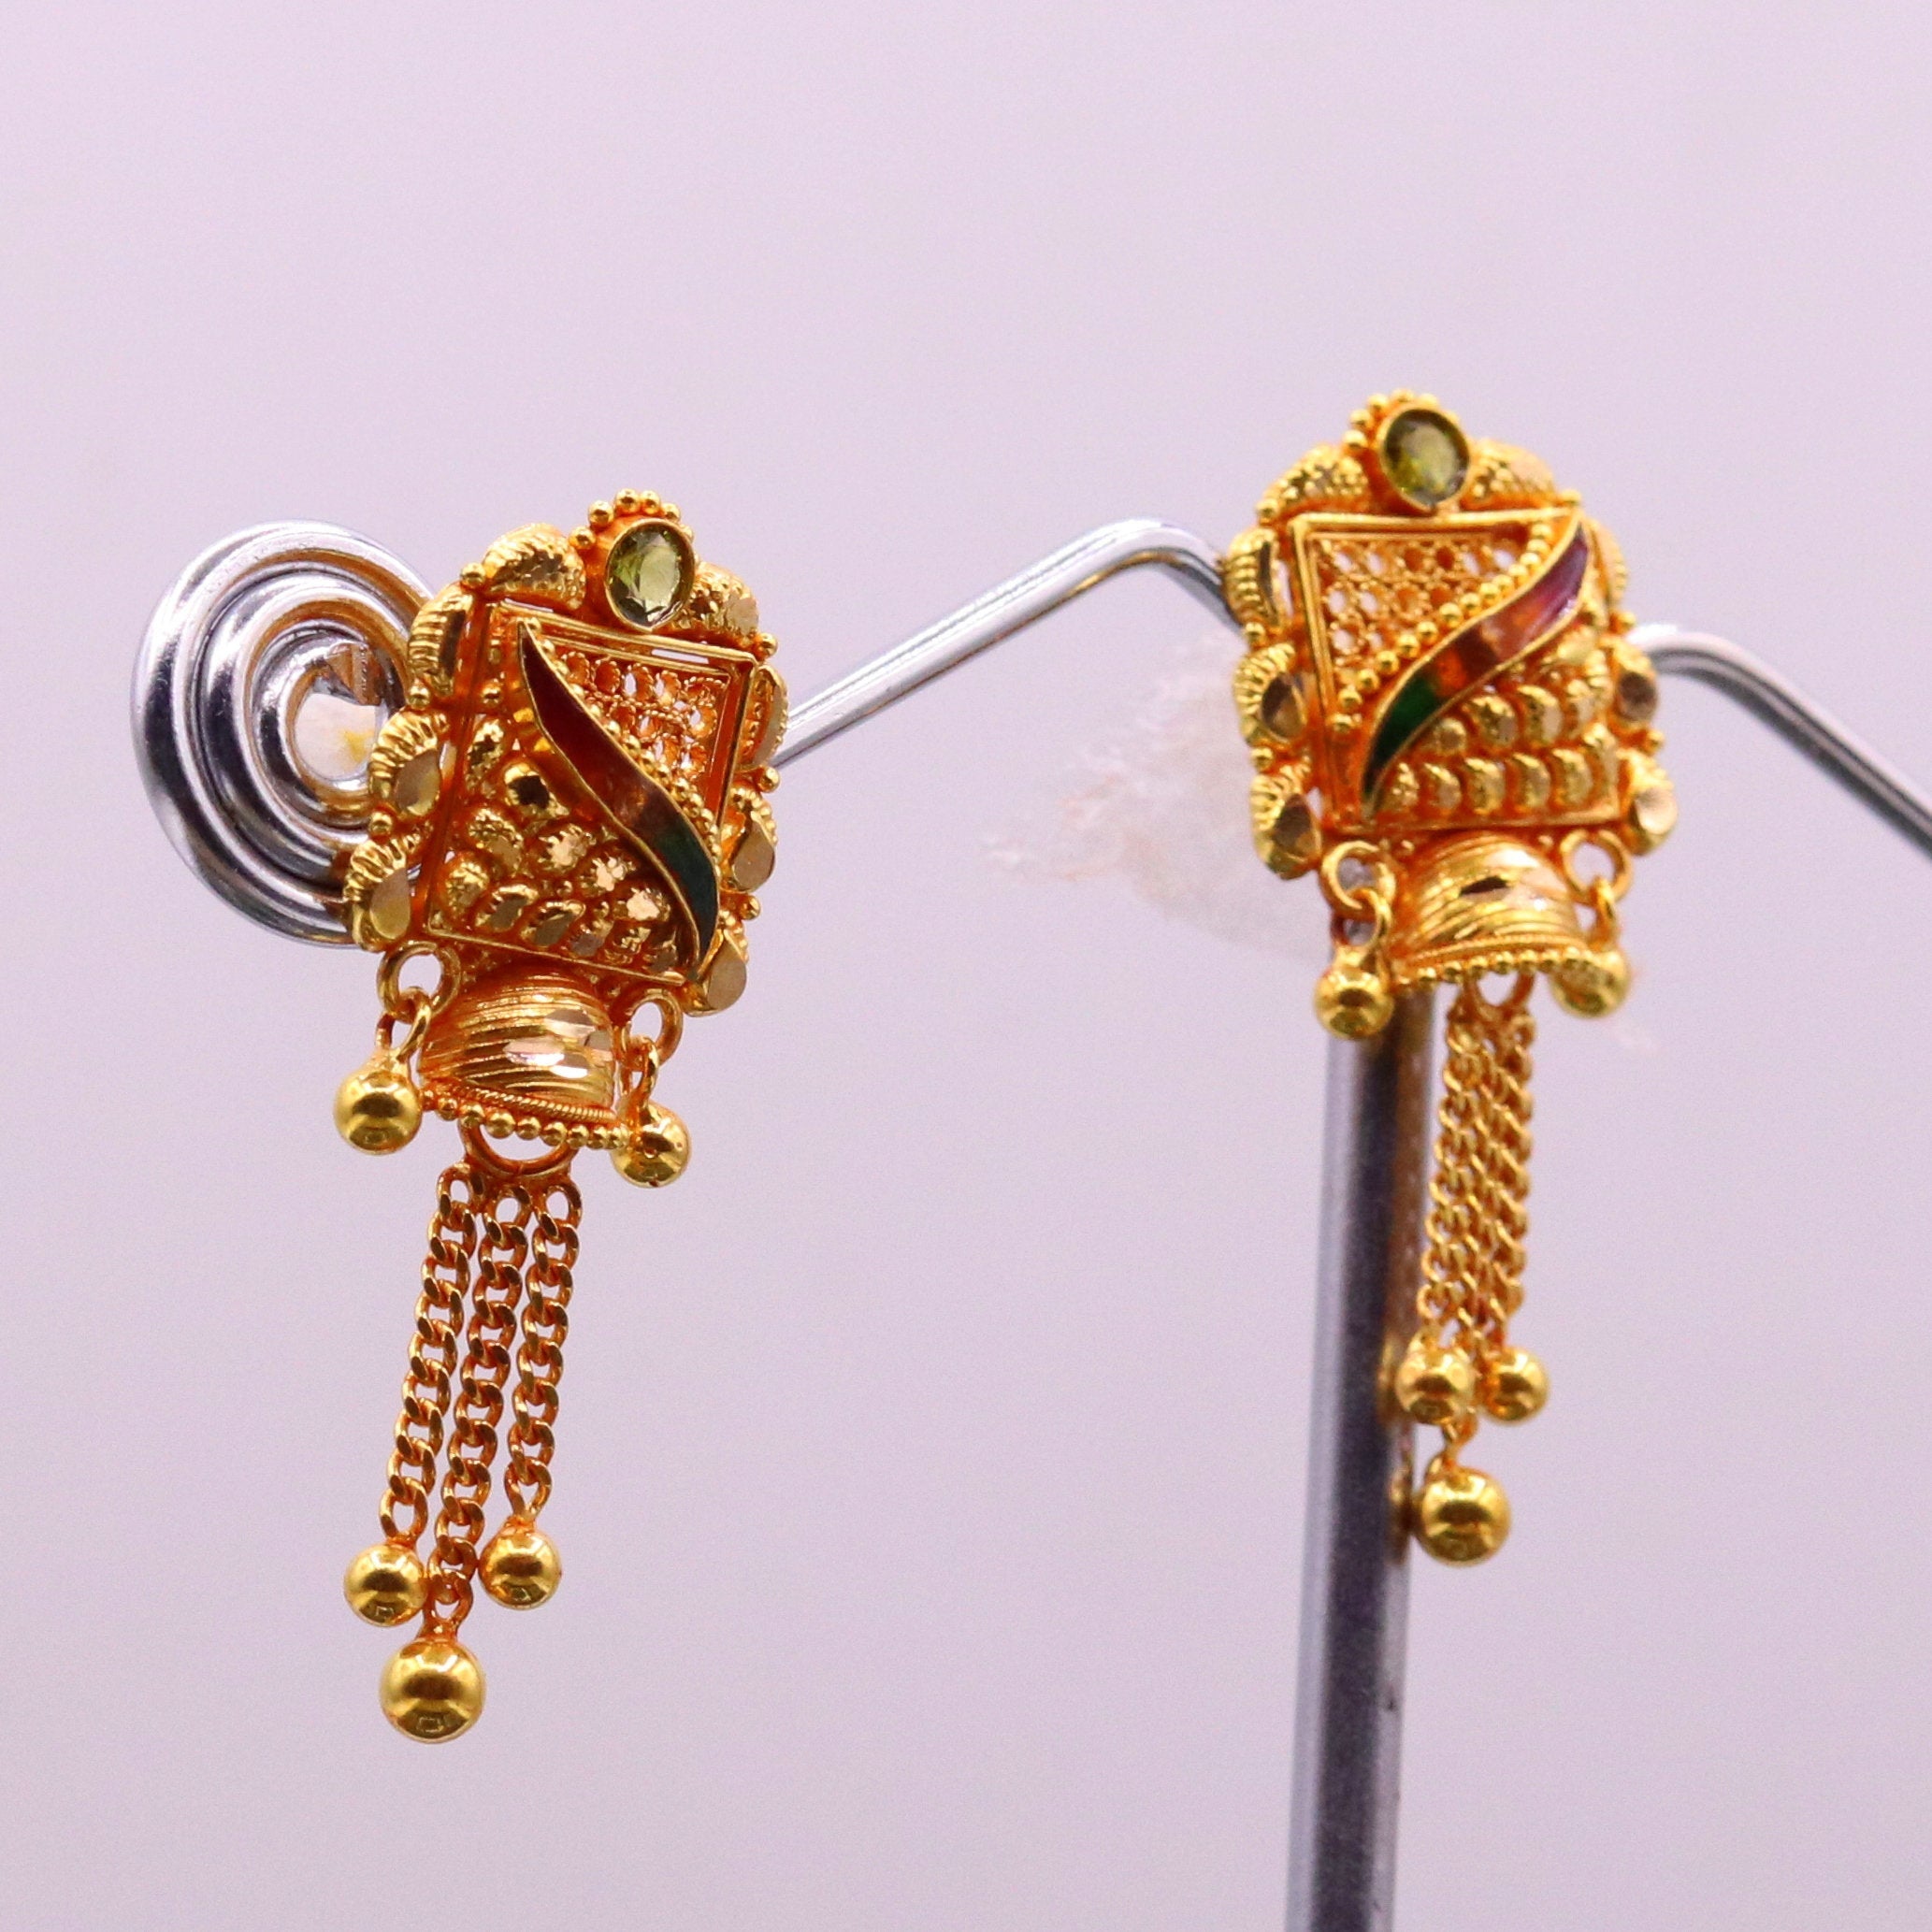 Antique Gold Finish High Quality Studs in Polki Stones | Stud Earring for  Women | Indian Jewelry | Polki Earrings | Gift For Her | Women's earrings, Stud  earrings, Stone studs